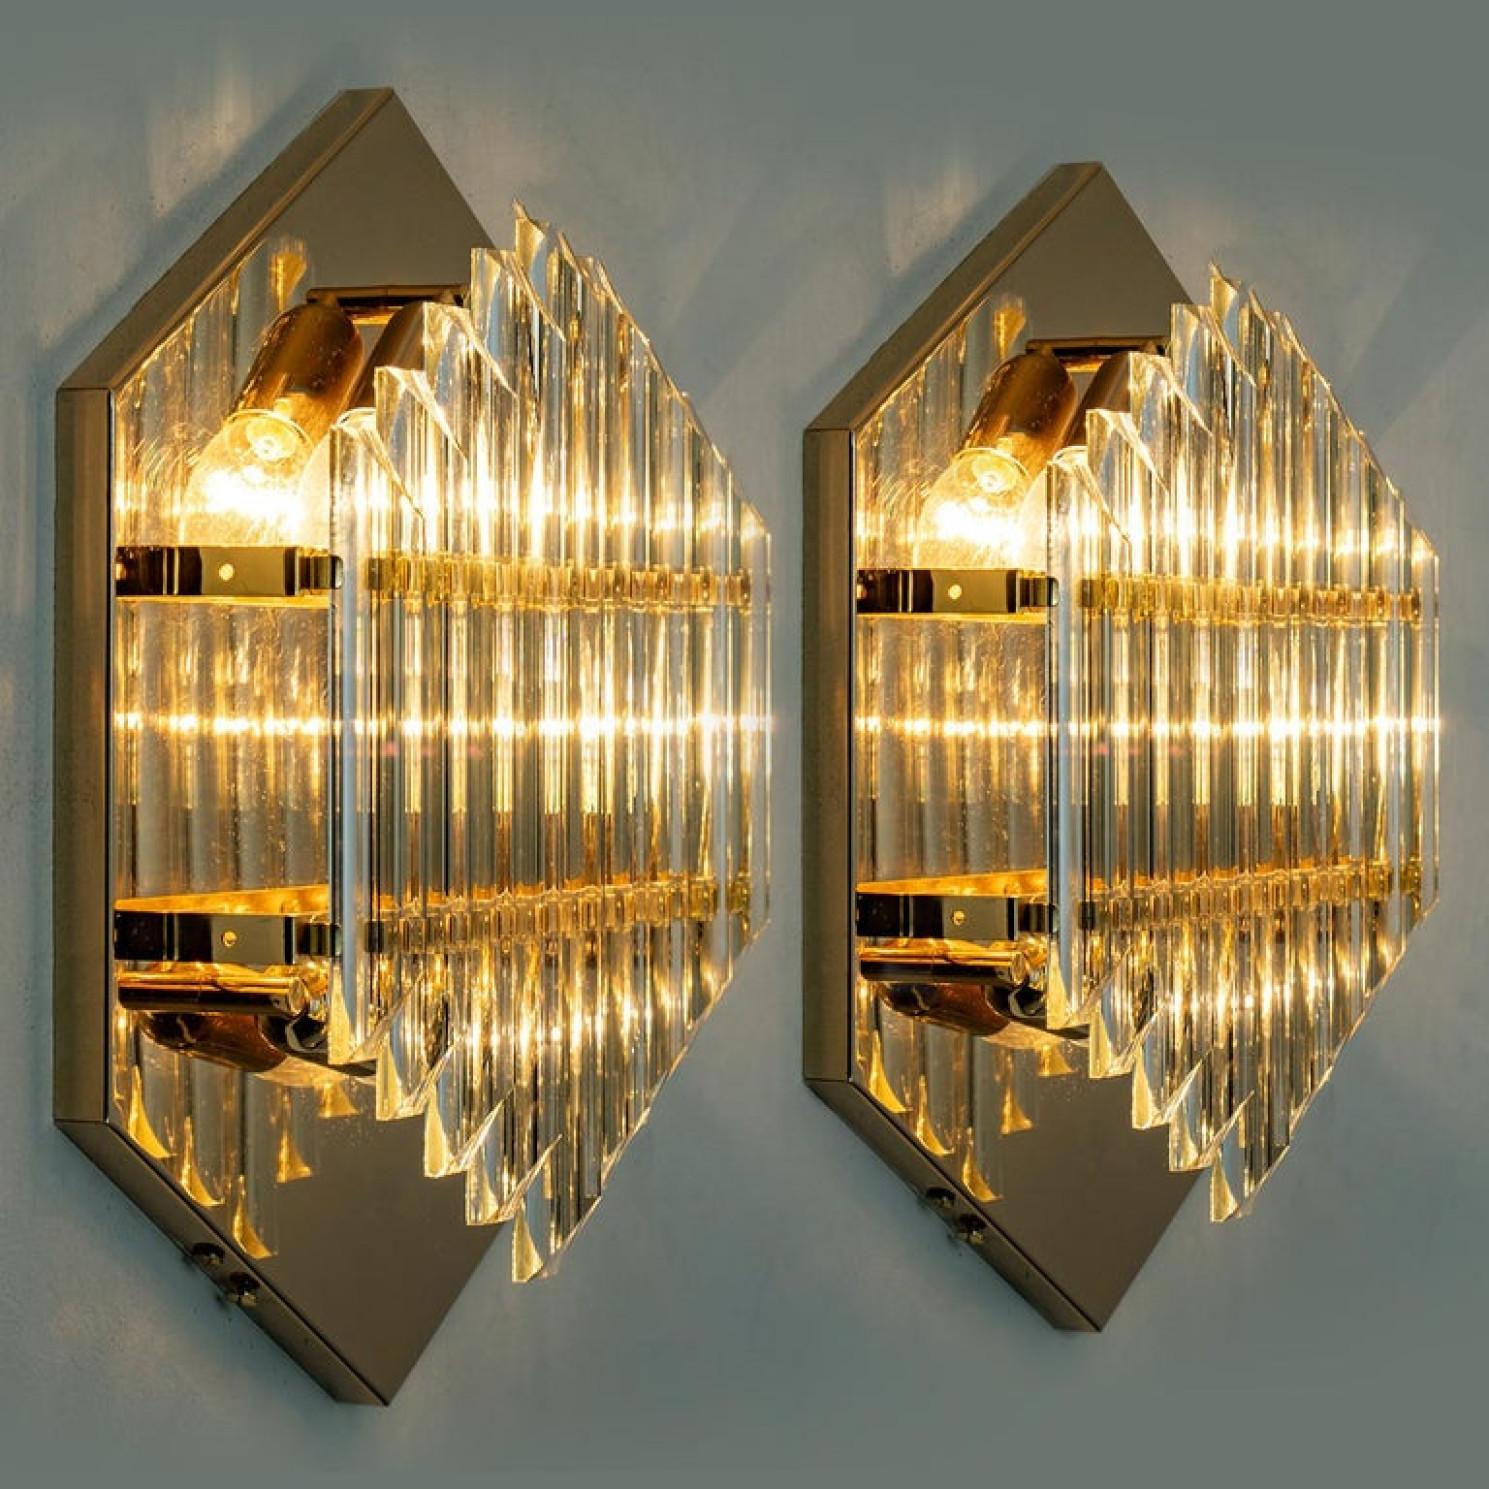 Mid-Century Modern 1 of the 6 Large Venini Style Glass Sconces with Triedi Crystals, 1969 For Sale